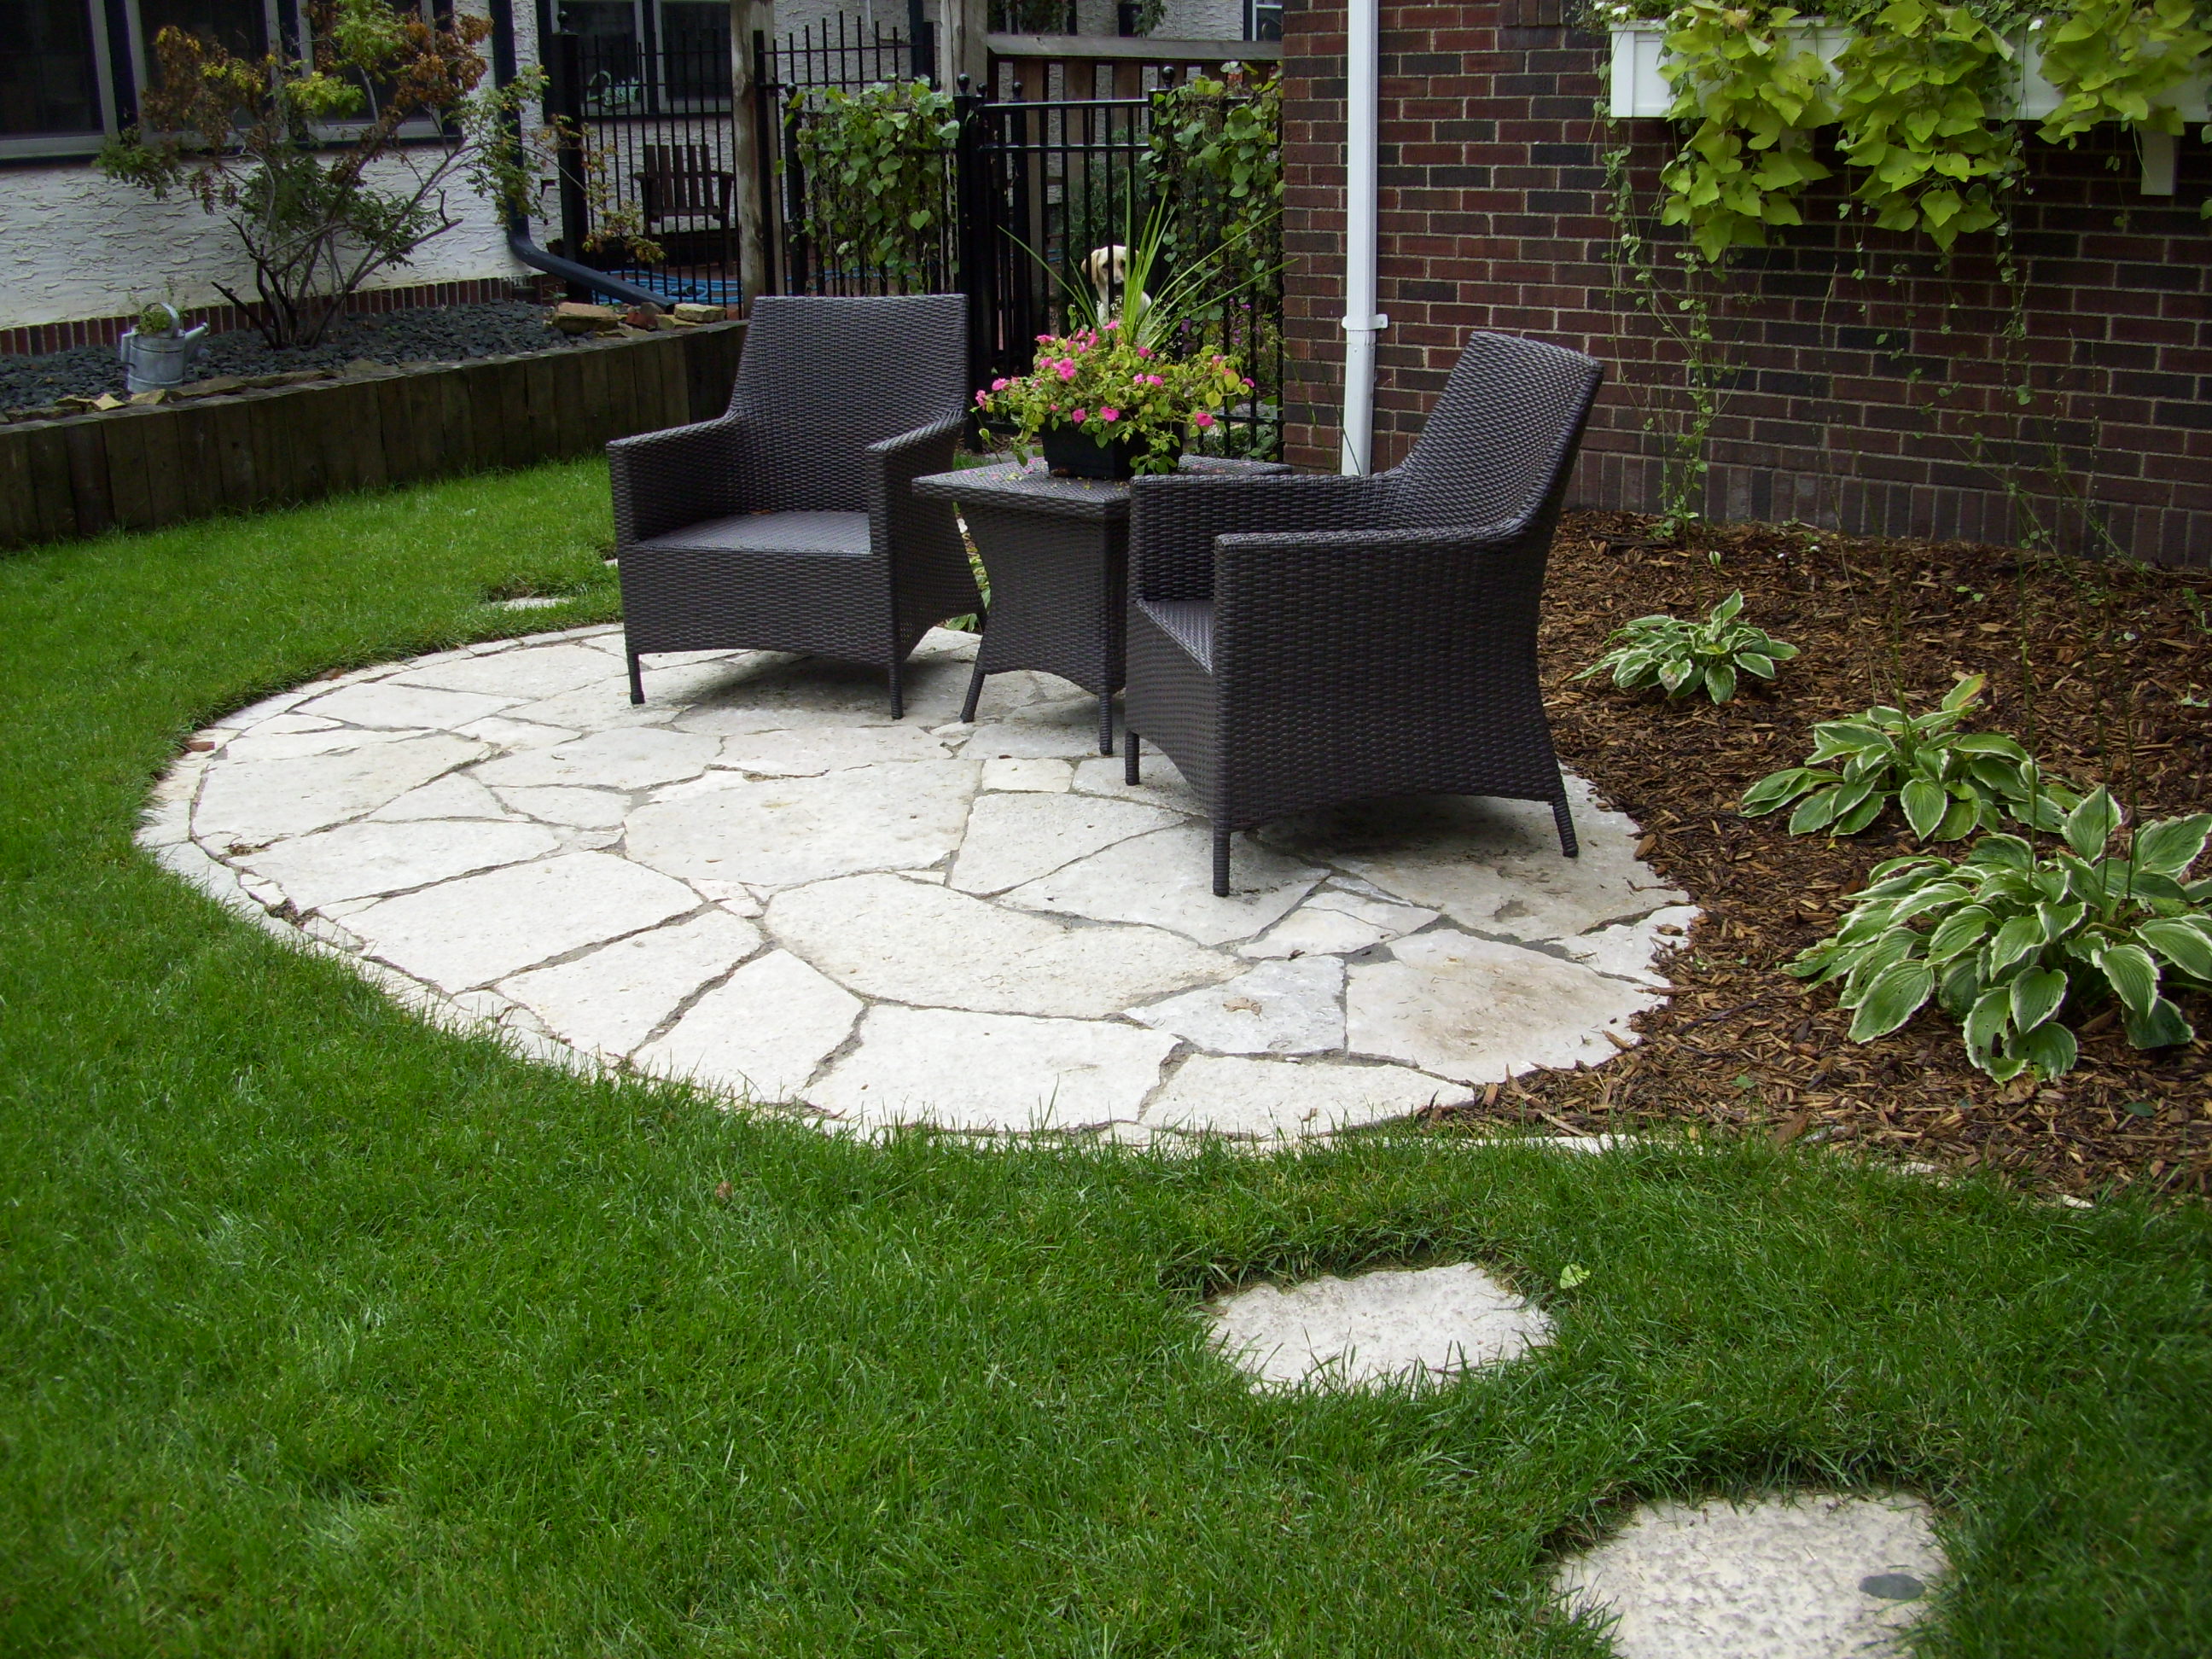 Patio, Making Your Home More Refreshed! - InspirationSeek.com